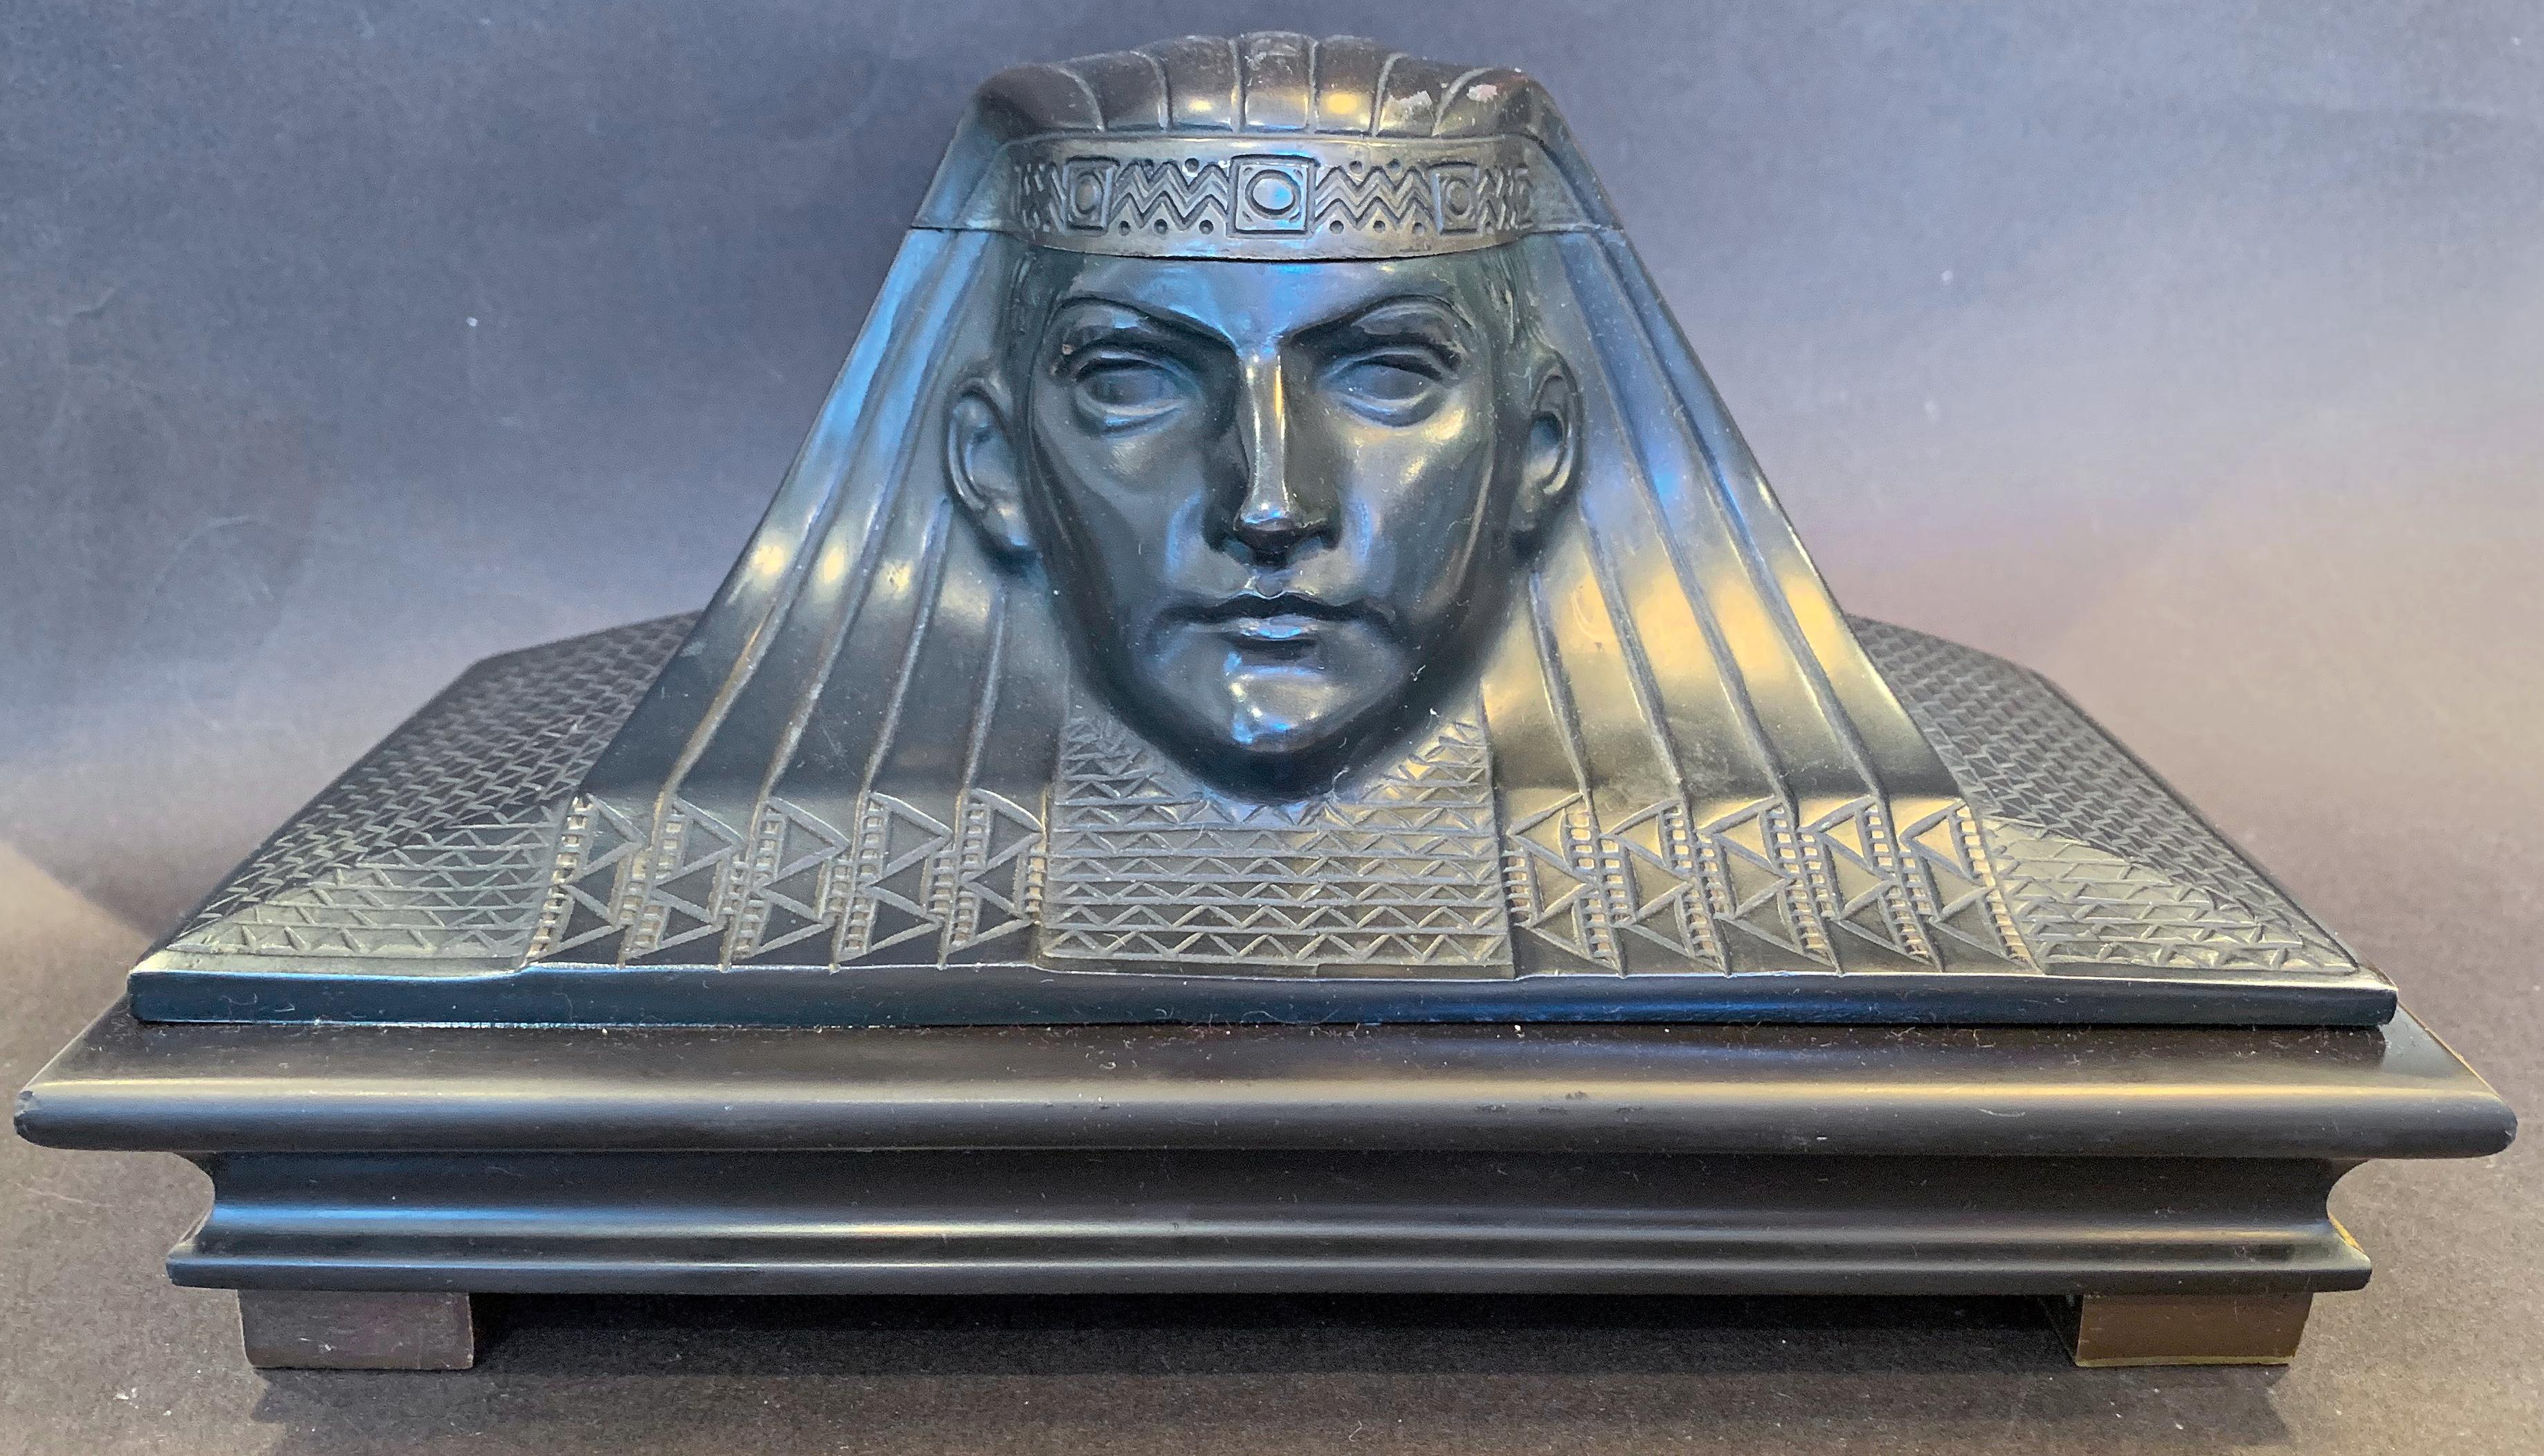 This magnificent bronze desk set -- including a large inkwell in the form of a Pharaoh's head, accompanied by a rocking blotter, paperweight and letter opener, each with Pharaoh or sphinx motifs -- is highly unusual, and may be unique. The quality